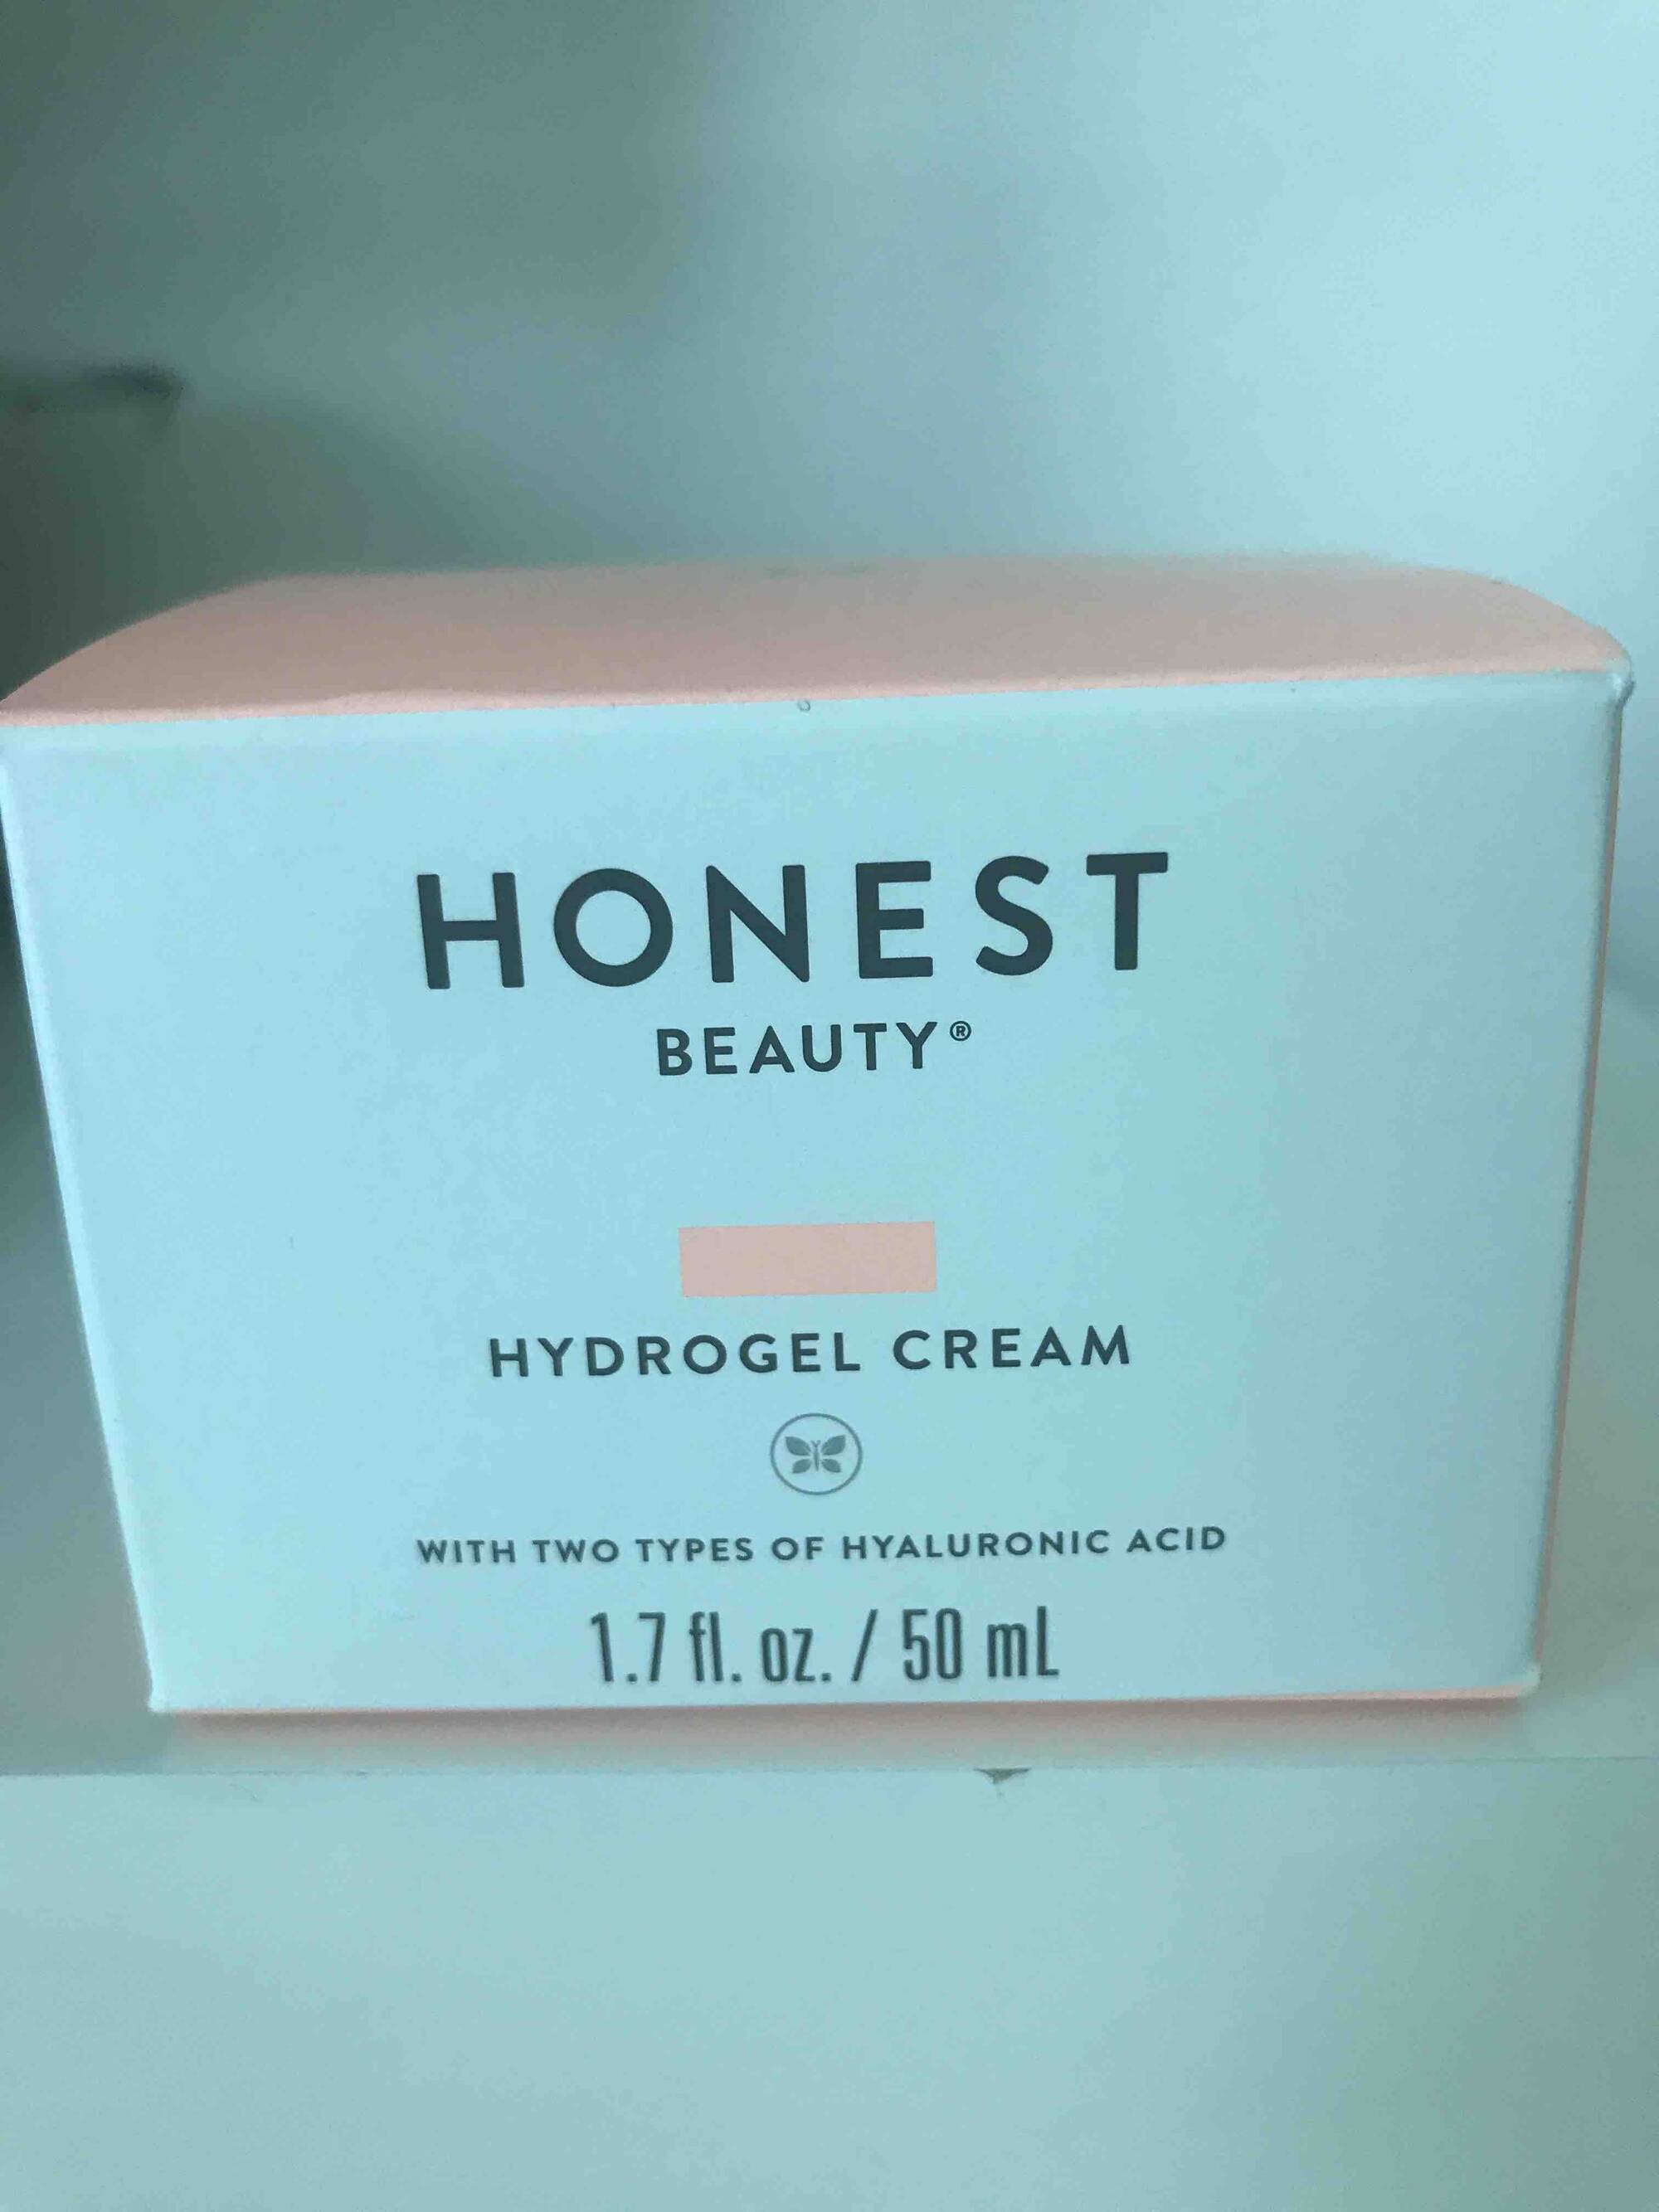 HONEST BEAUTY - Hydrogel cream with two types of hyaluronic acid